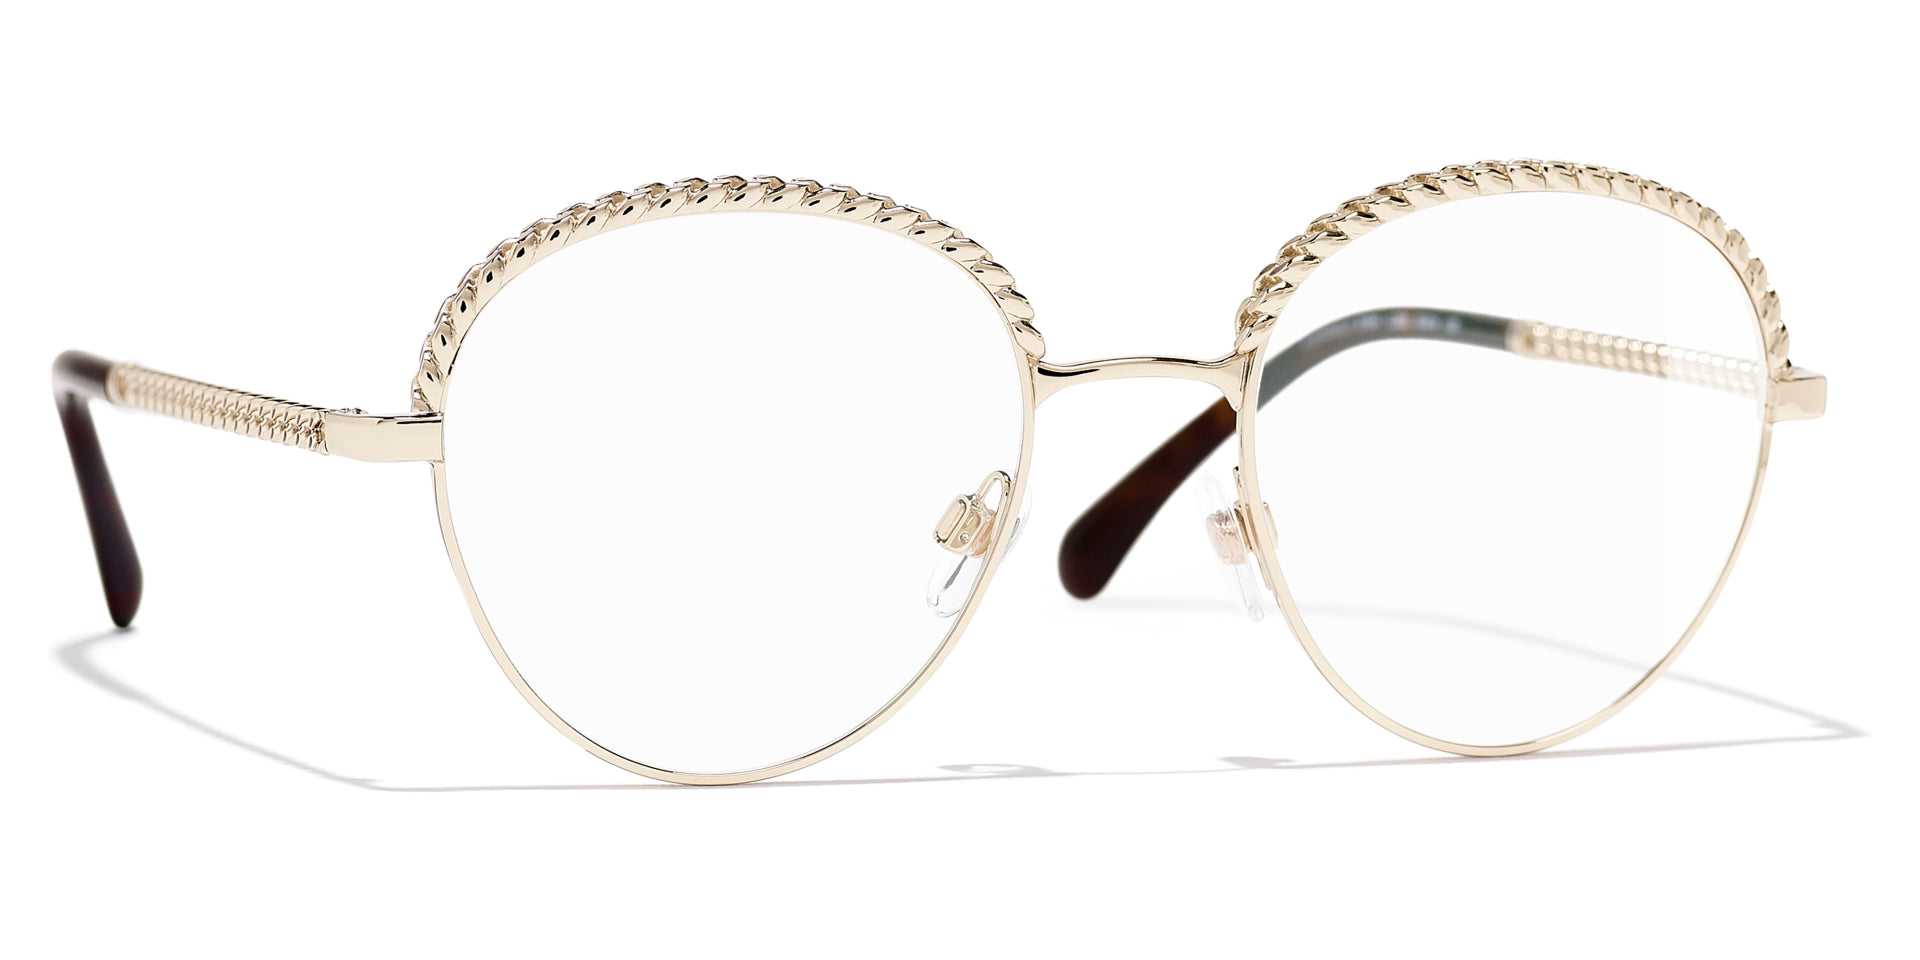 Adorned with pearls – CHANEL Eyewear